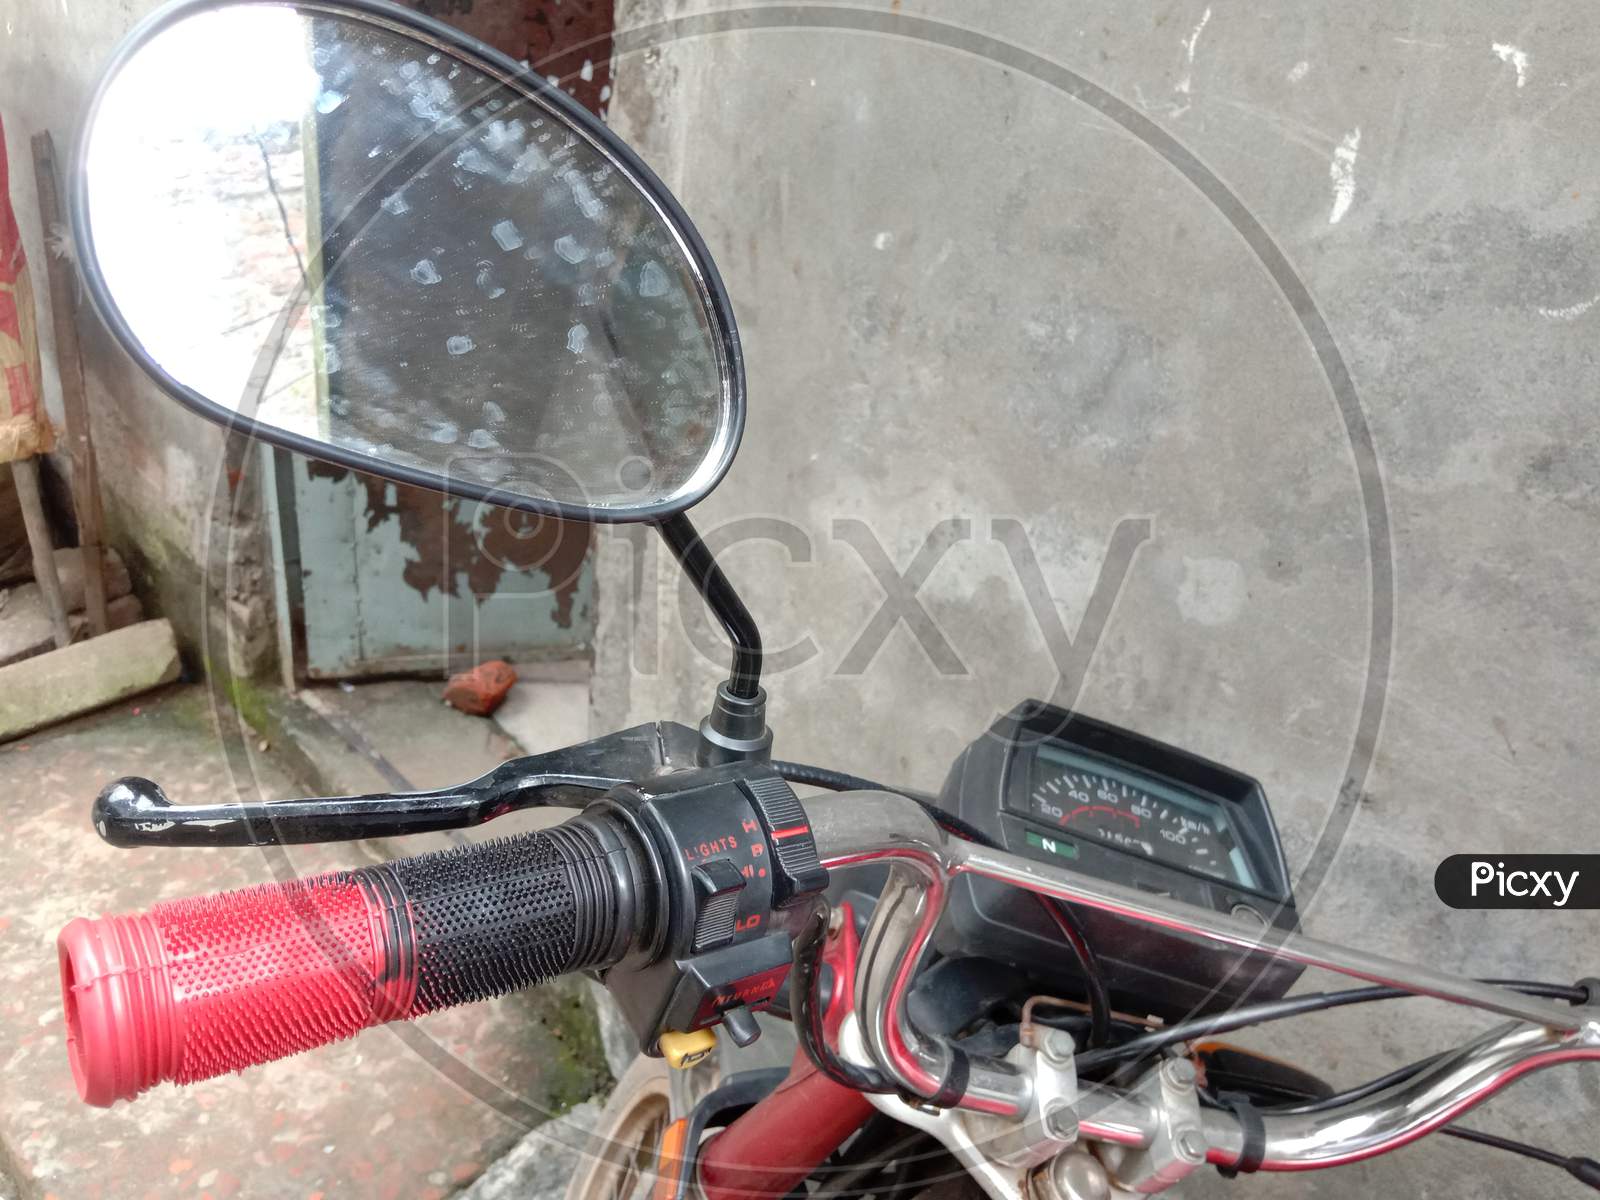 Front Side Of Bike With Mirror